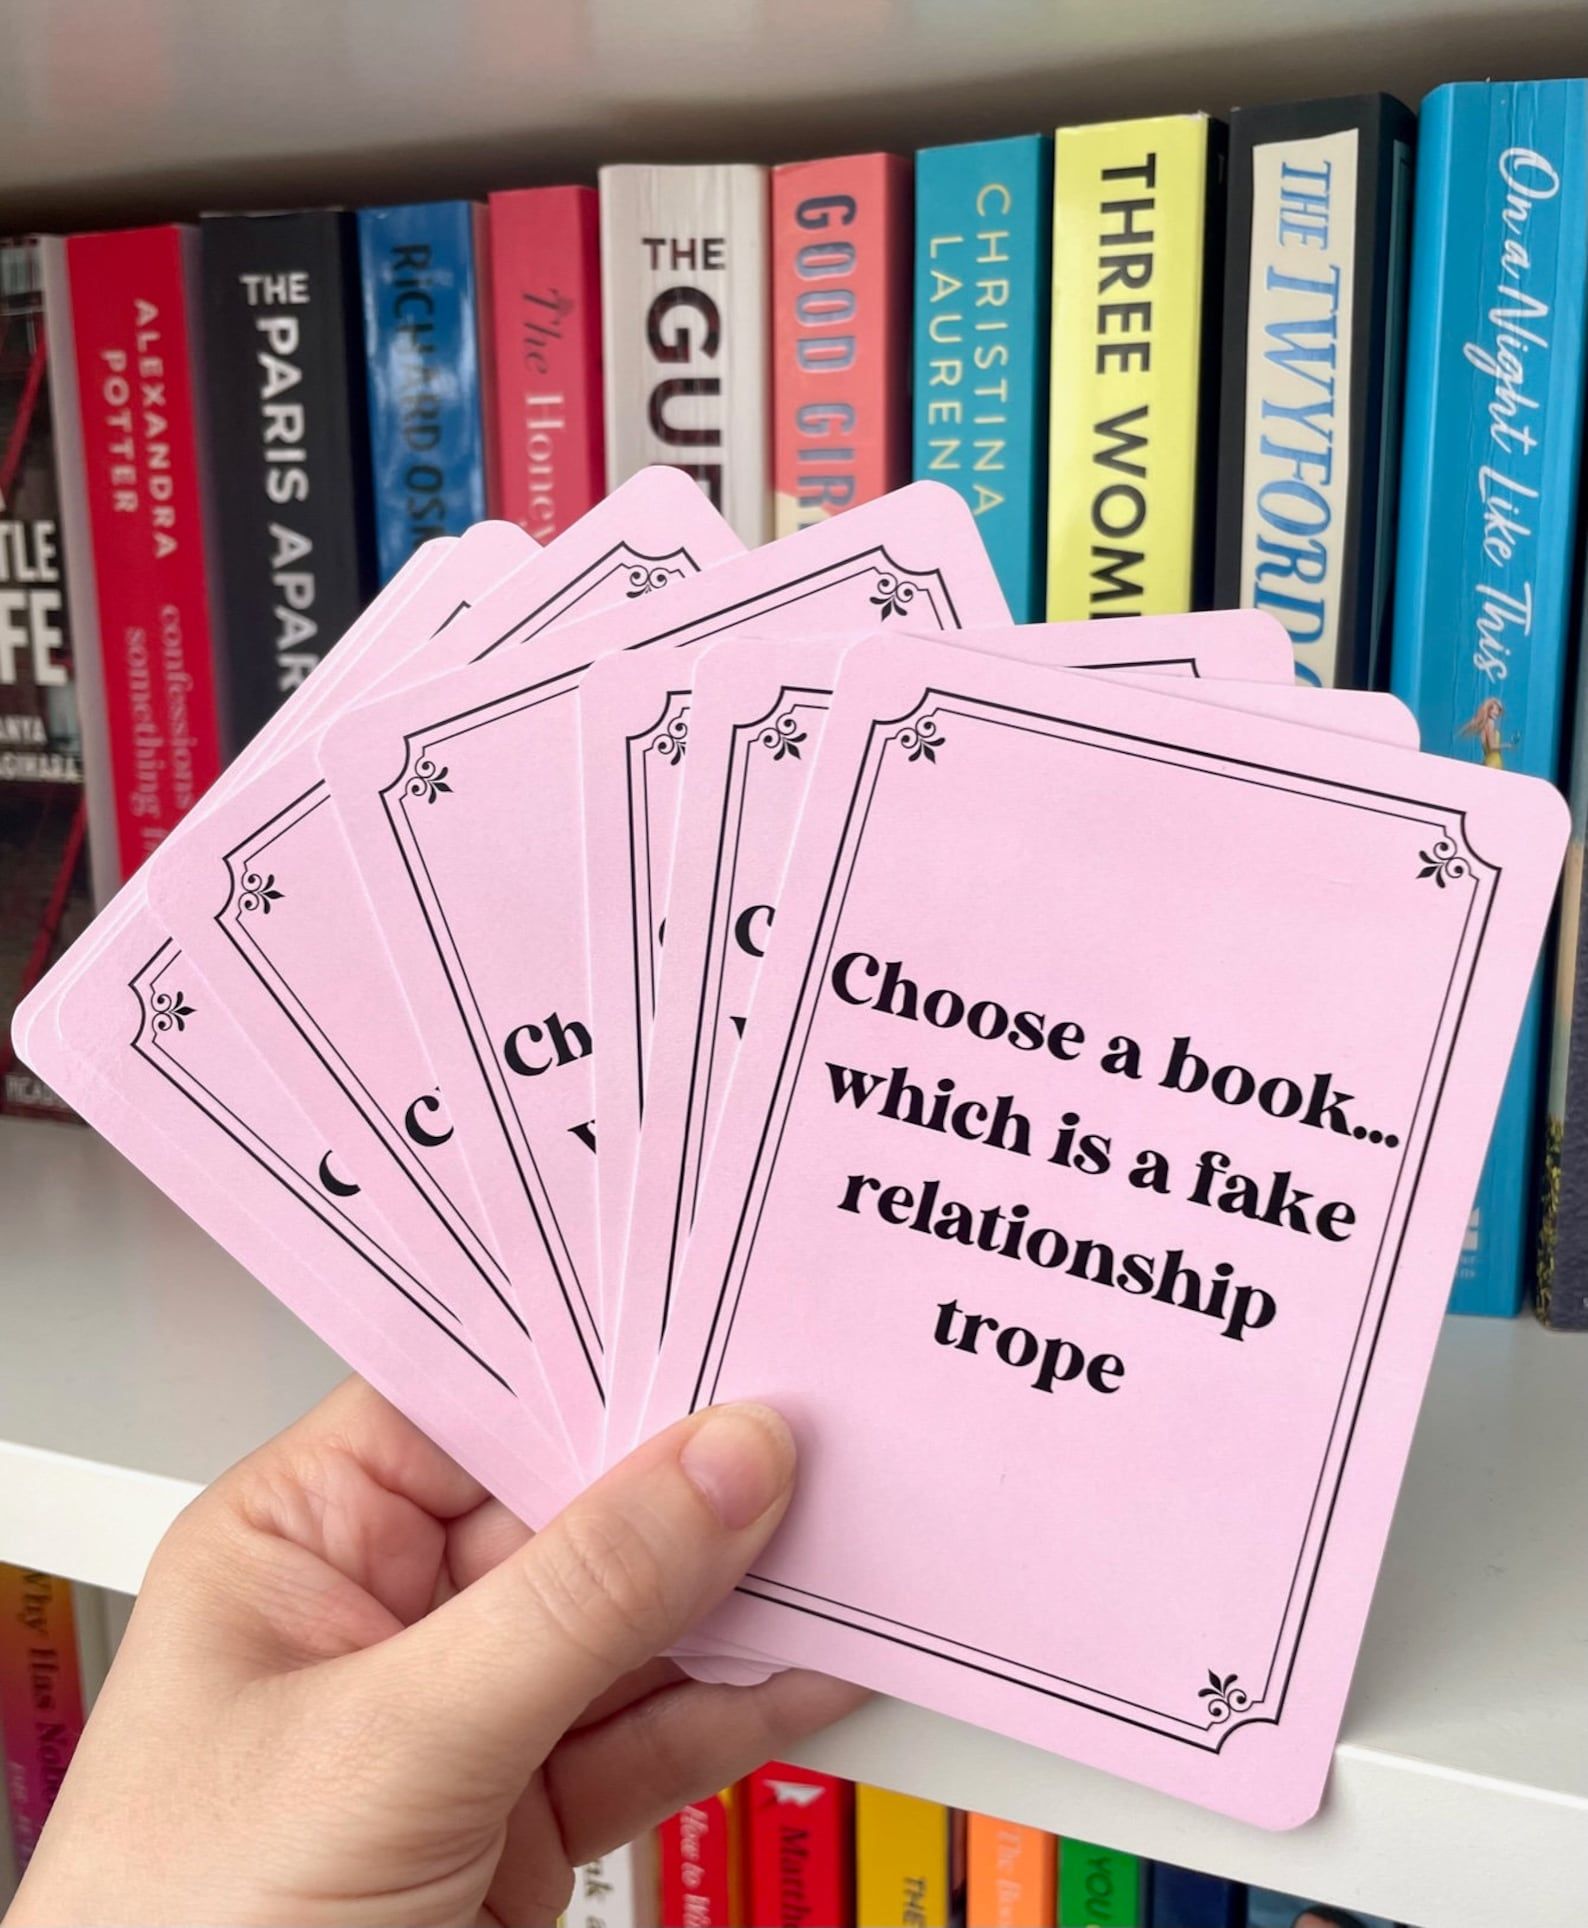 set of pink cards with black writing that prompts various books, such as "choose a book with a fake relationship"